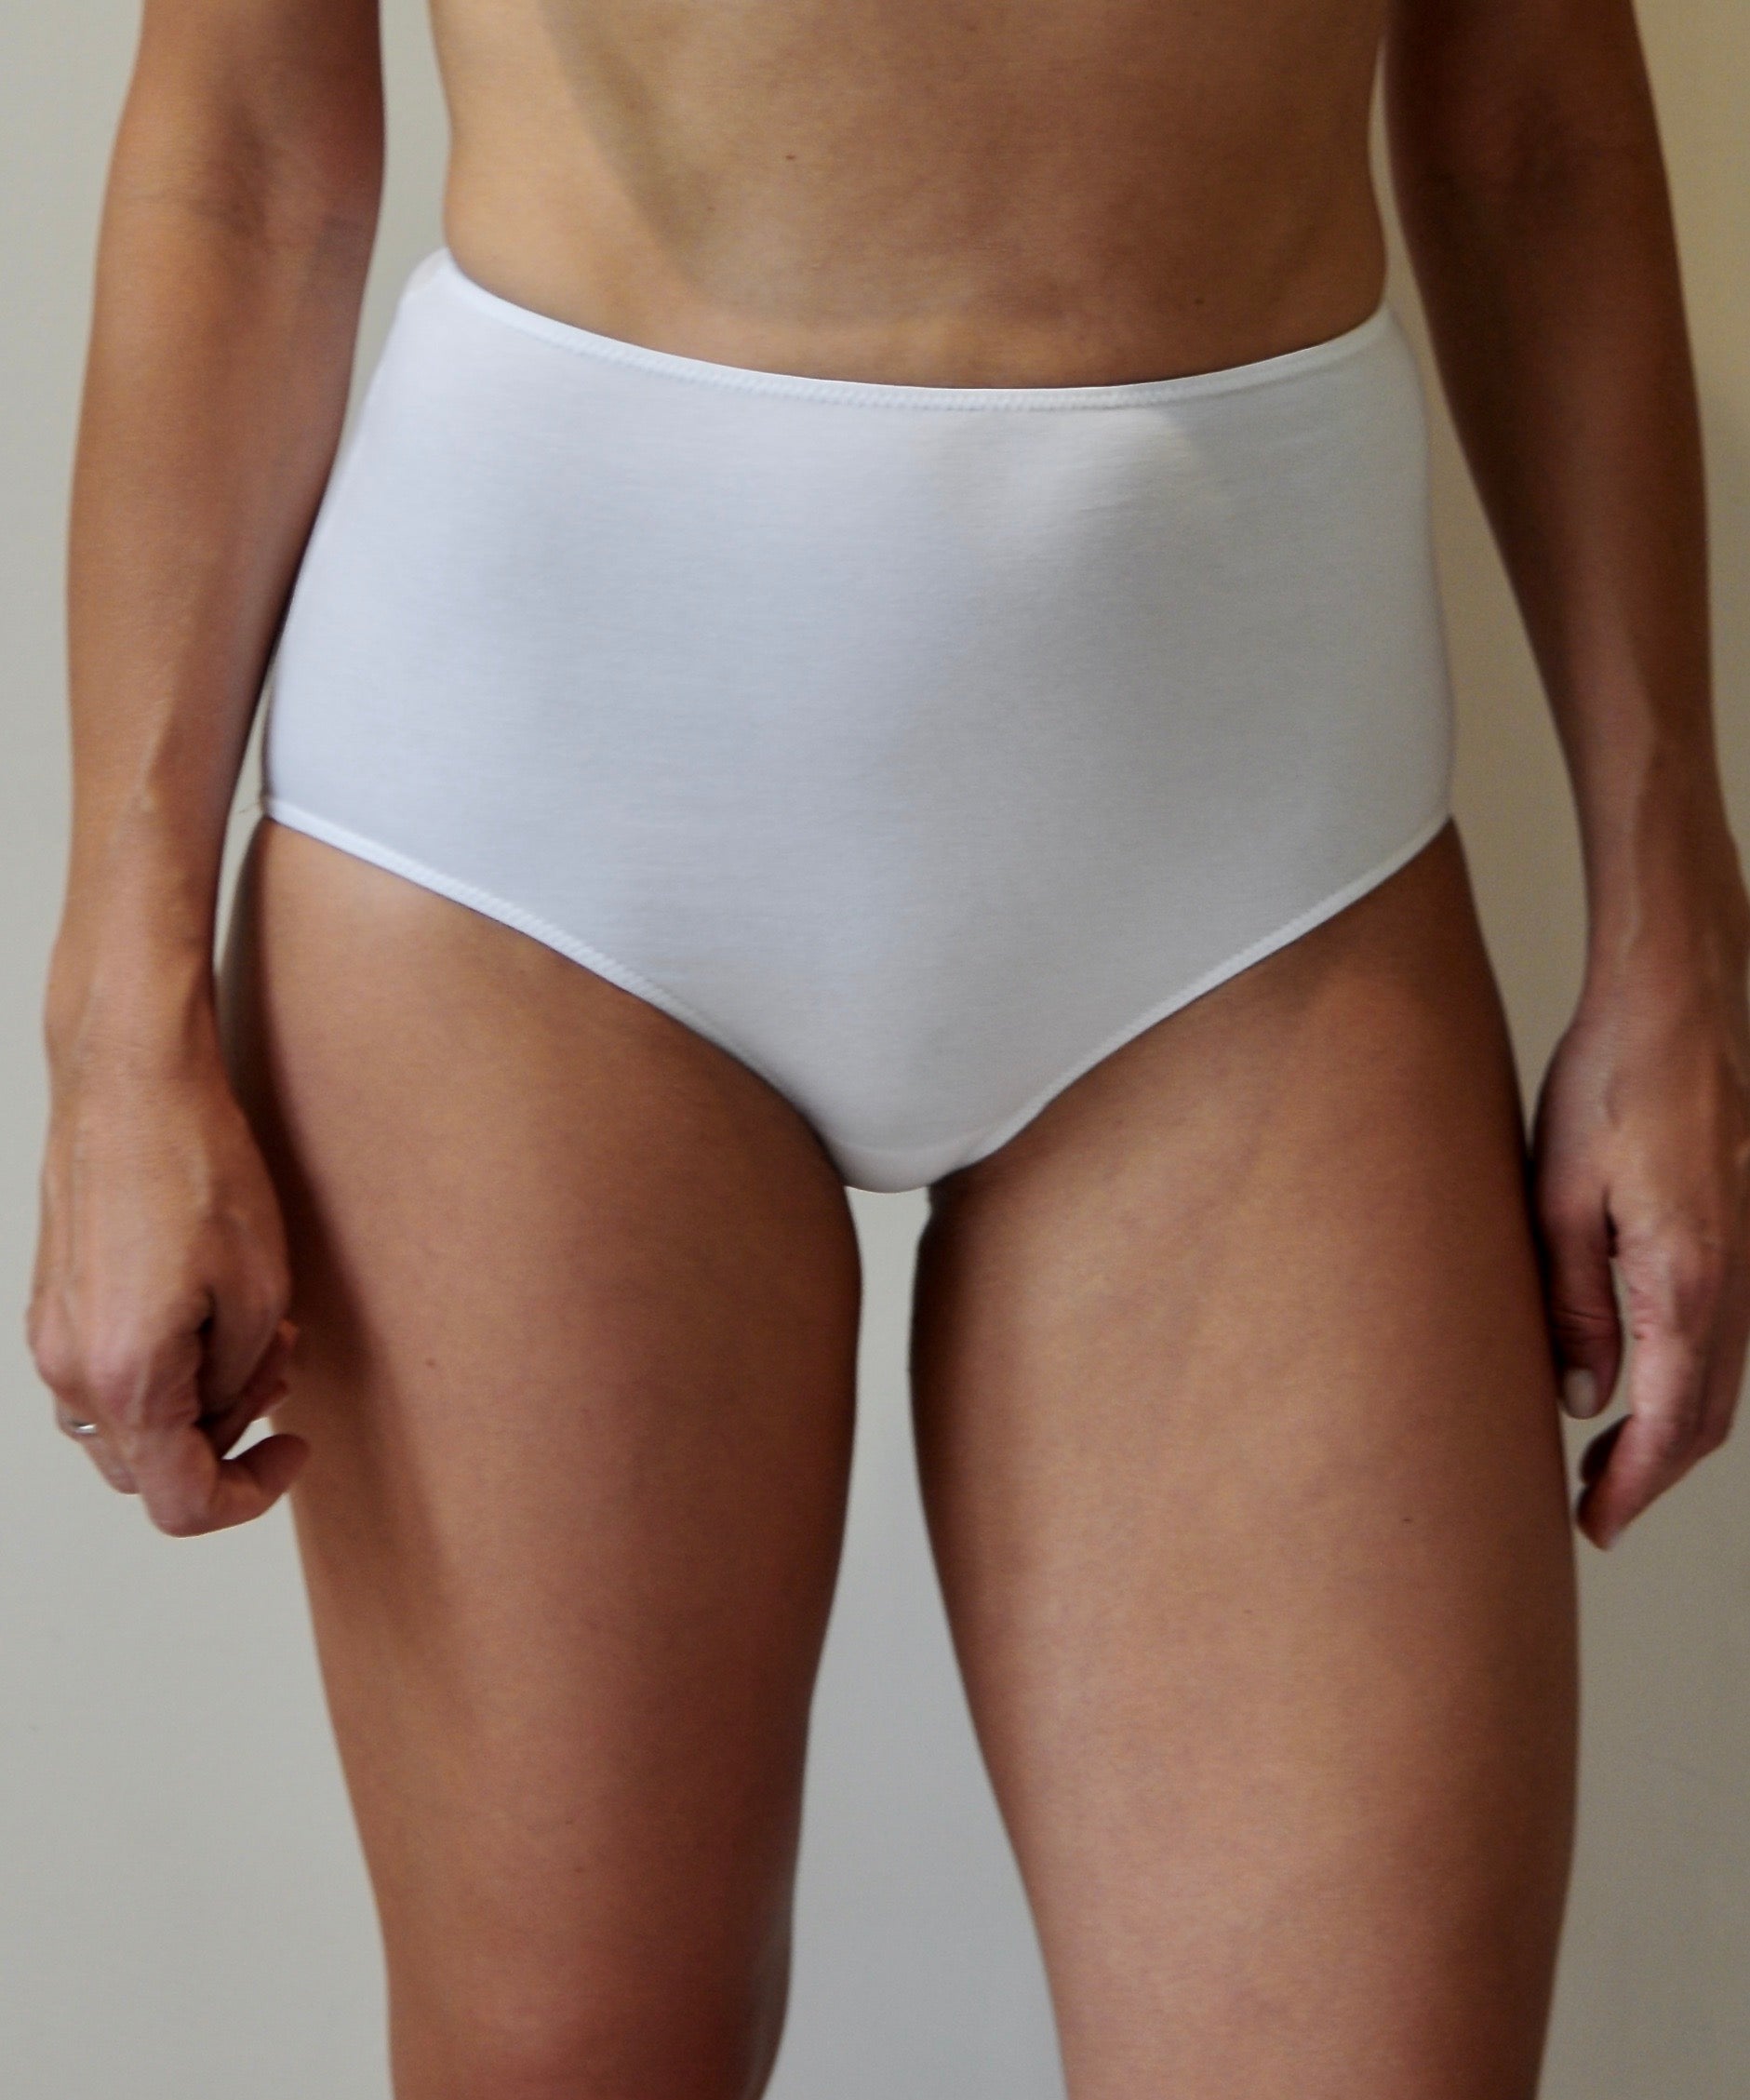 boujo-hake-big-knickers-high-briefs-granny-pants-organic-cotton-made-in-the-uk